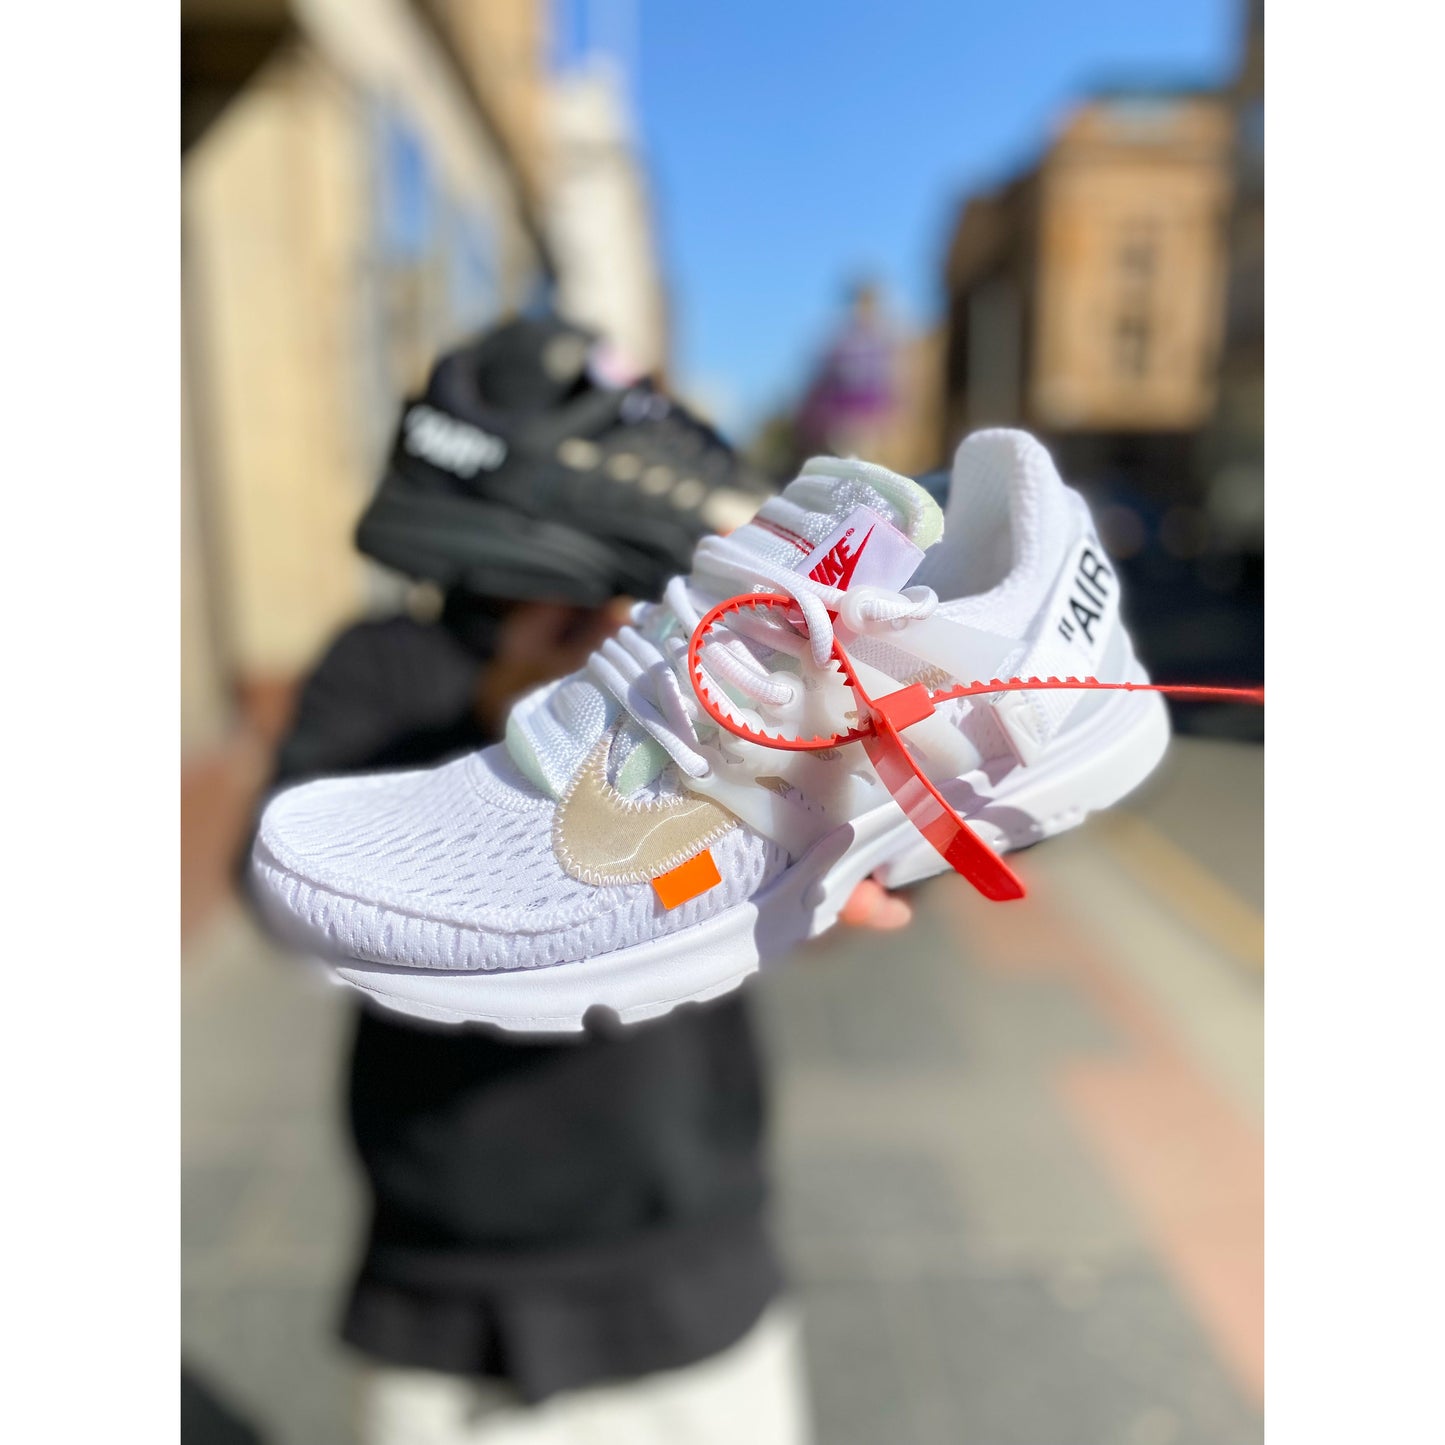 Nike Off White Air Presto White by Nike from £490.99